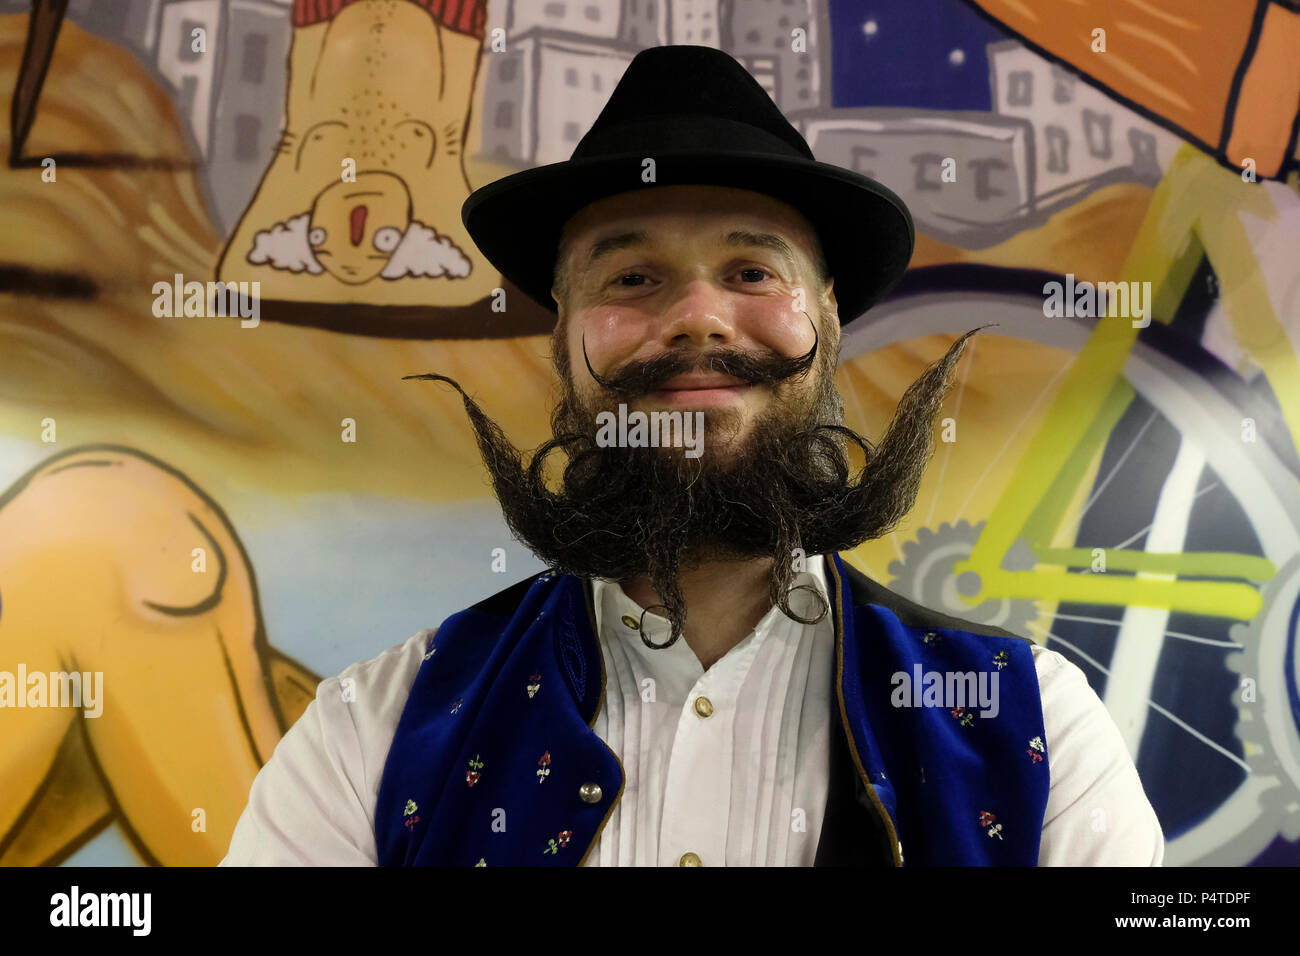 Tel Aviv, Israel, 22nd June 2018. German contestant in the Full Beard Freestyle category of the 'Open European Beard And Mustache Championship' poses for a picture during the championship which took place in Tel Aviv, Israel. 50 candidates from all over Europe took part in the contest conducted by The East Bavarian Beard and Moustache Club. Stock Photo